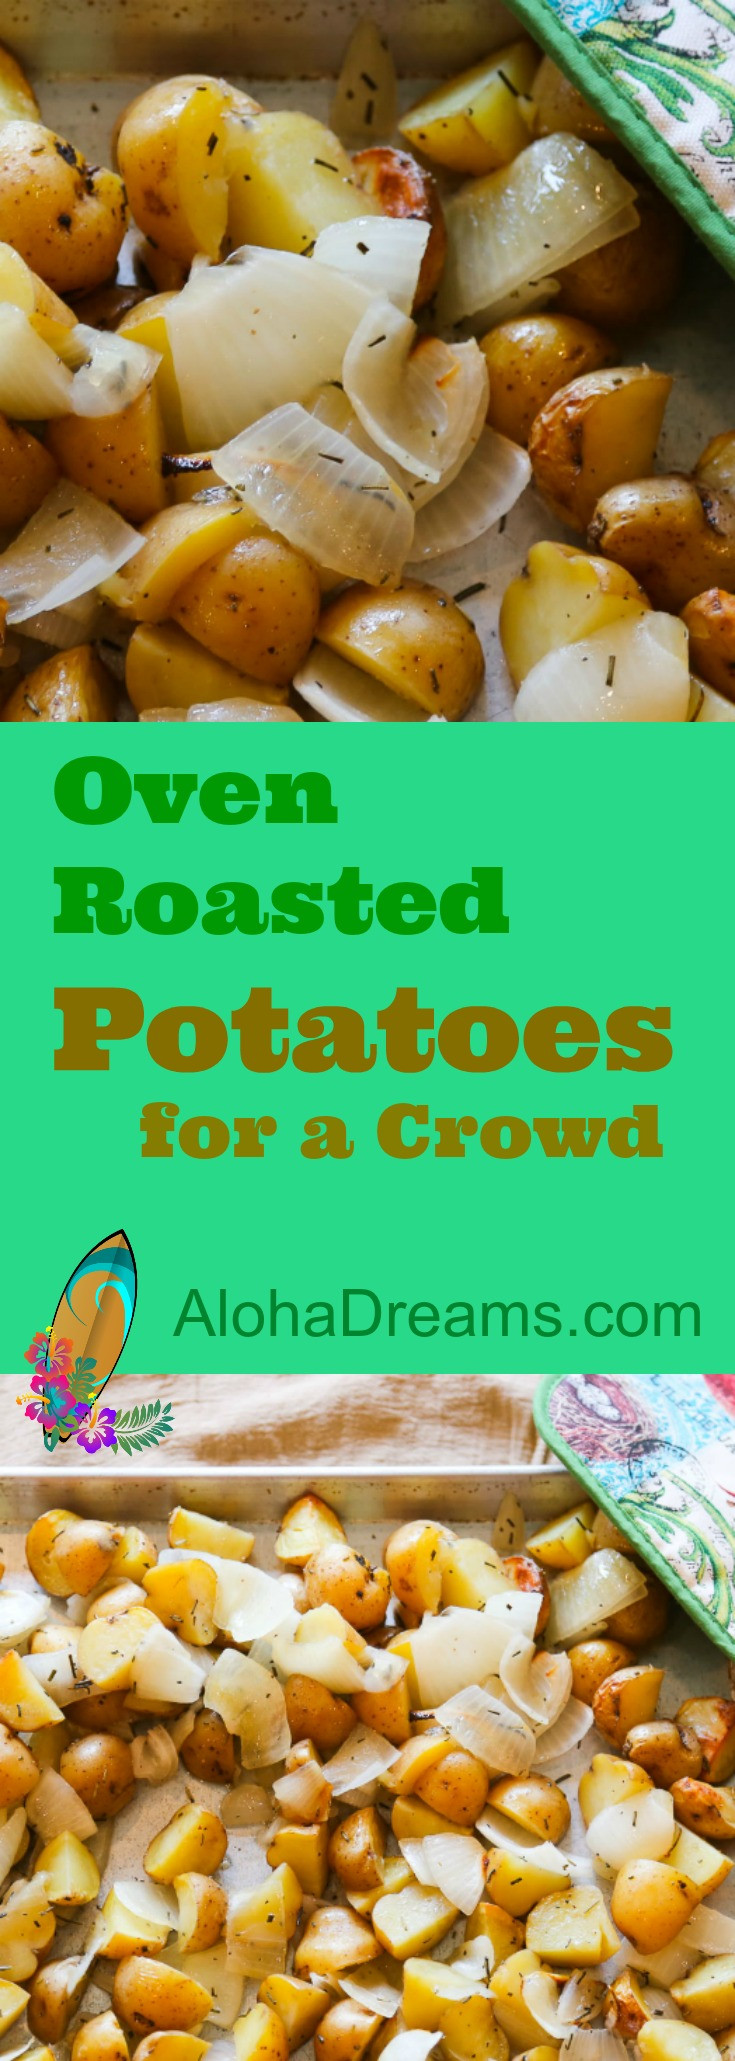 Side Dishes For Large Groups
 Roasted Potatoes for a Group